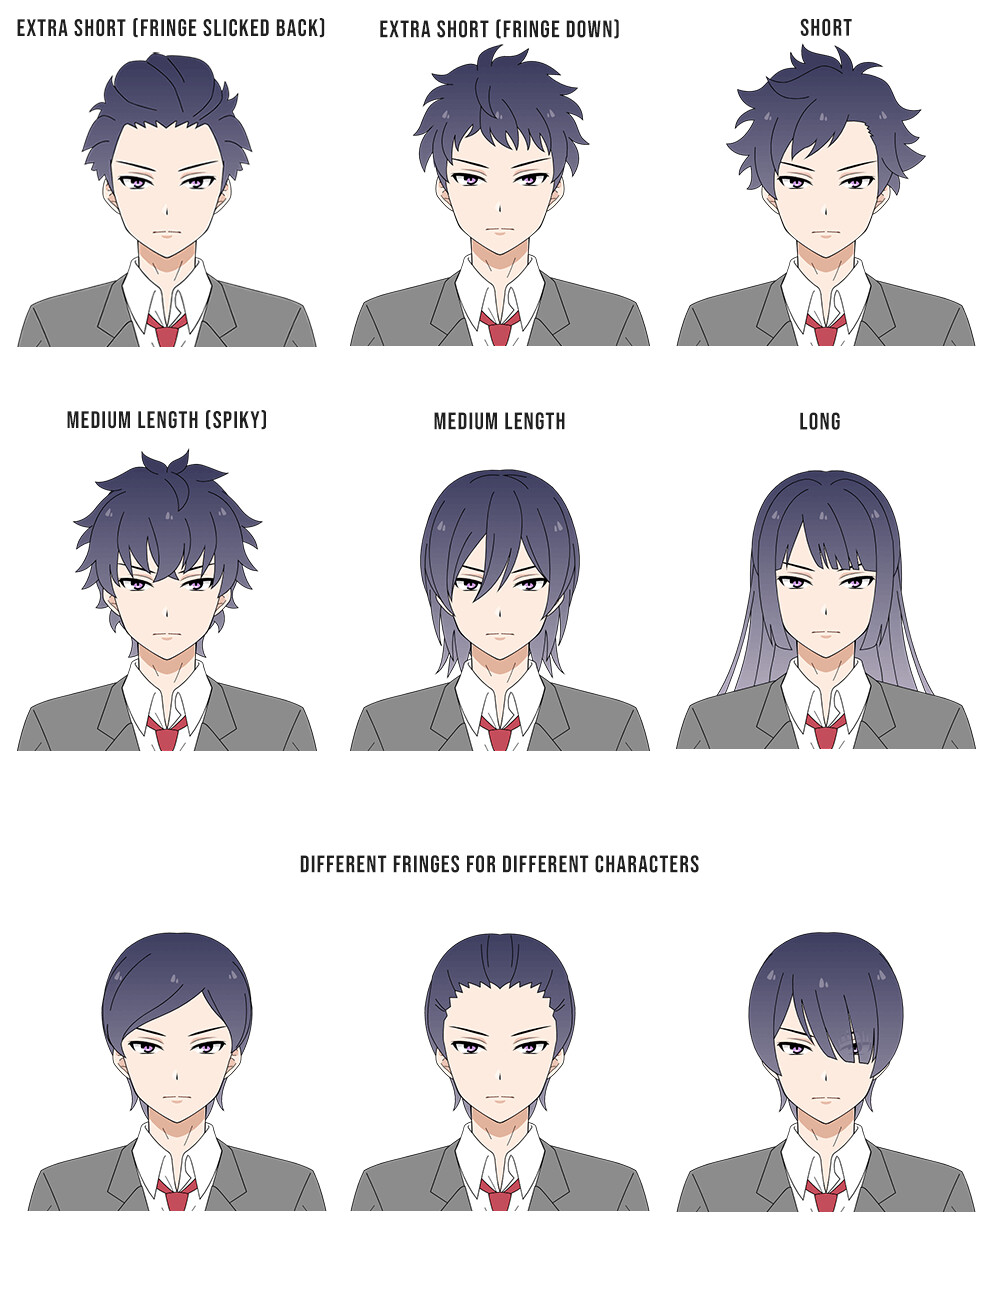 ArtStation  Anime hairstyles for men how does the hair we choose affect  our characters image